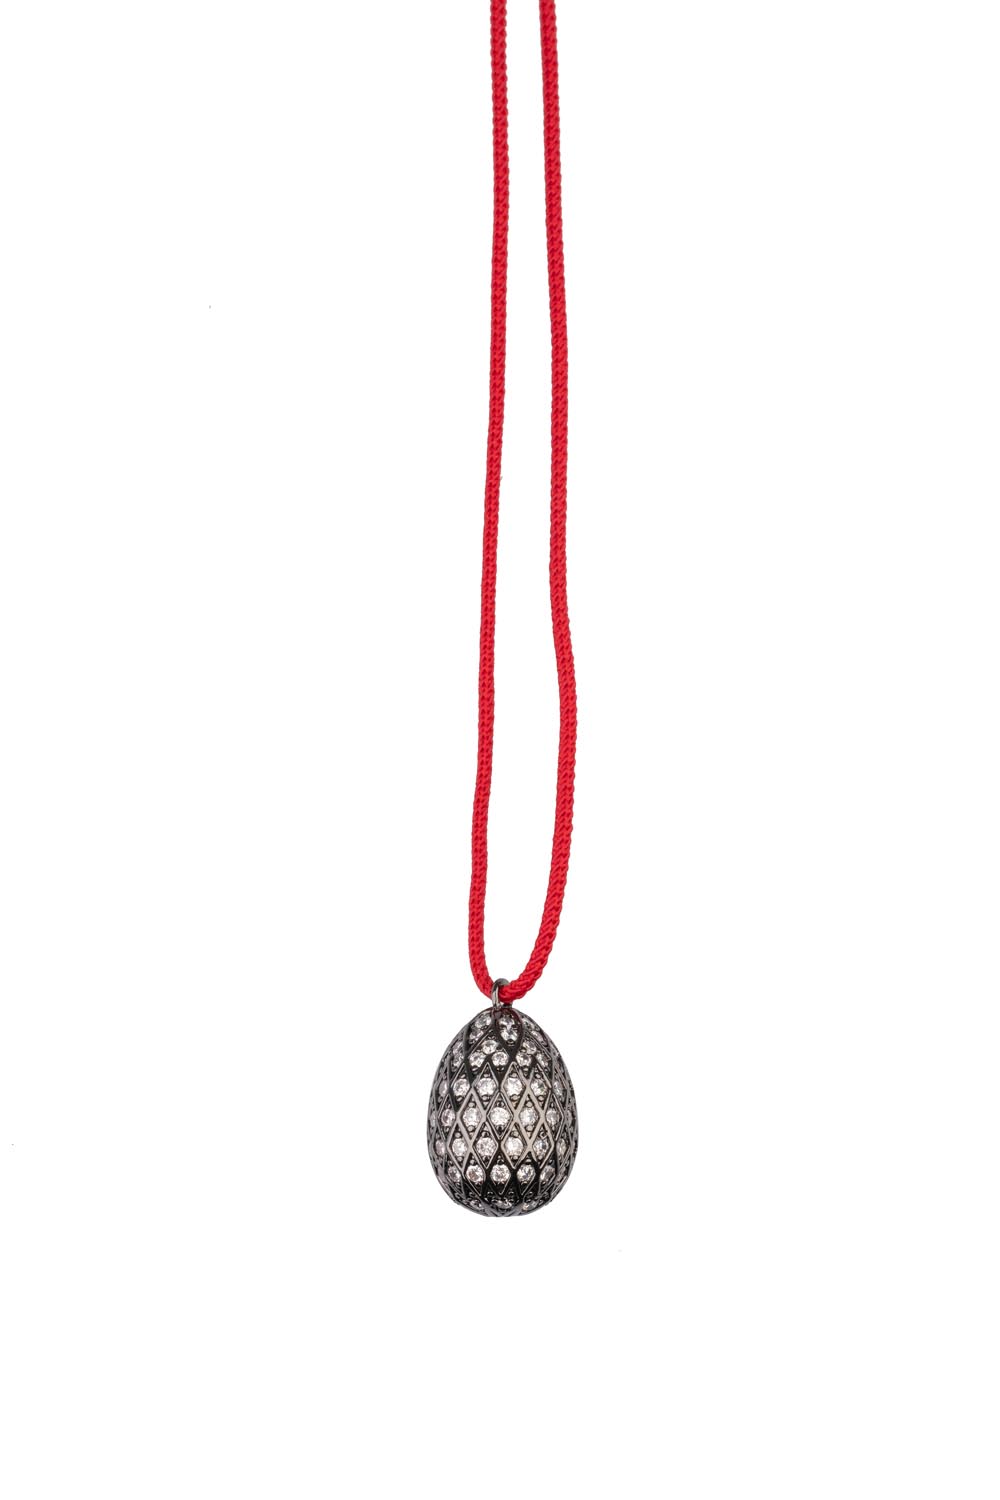 “Diamante” Easter Egg with Cord Necklace